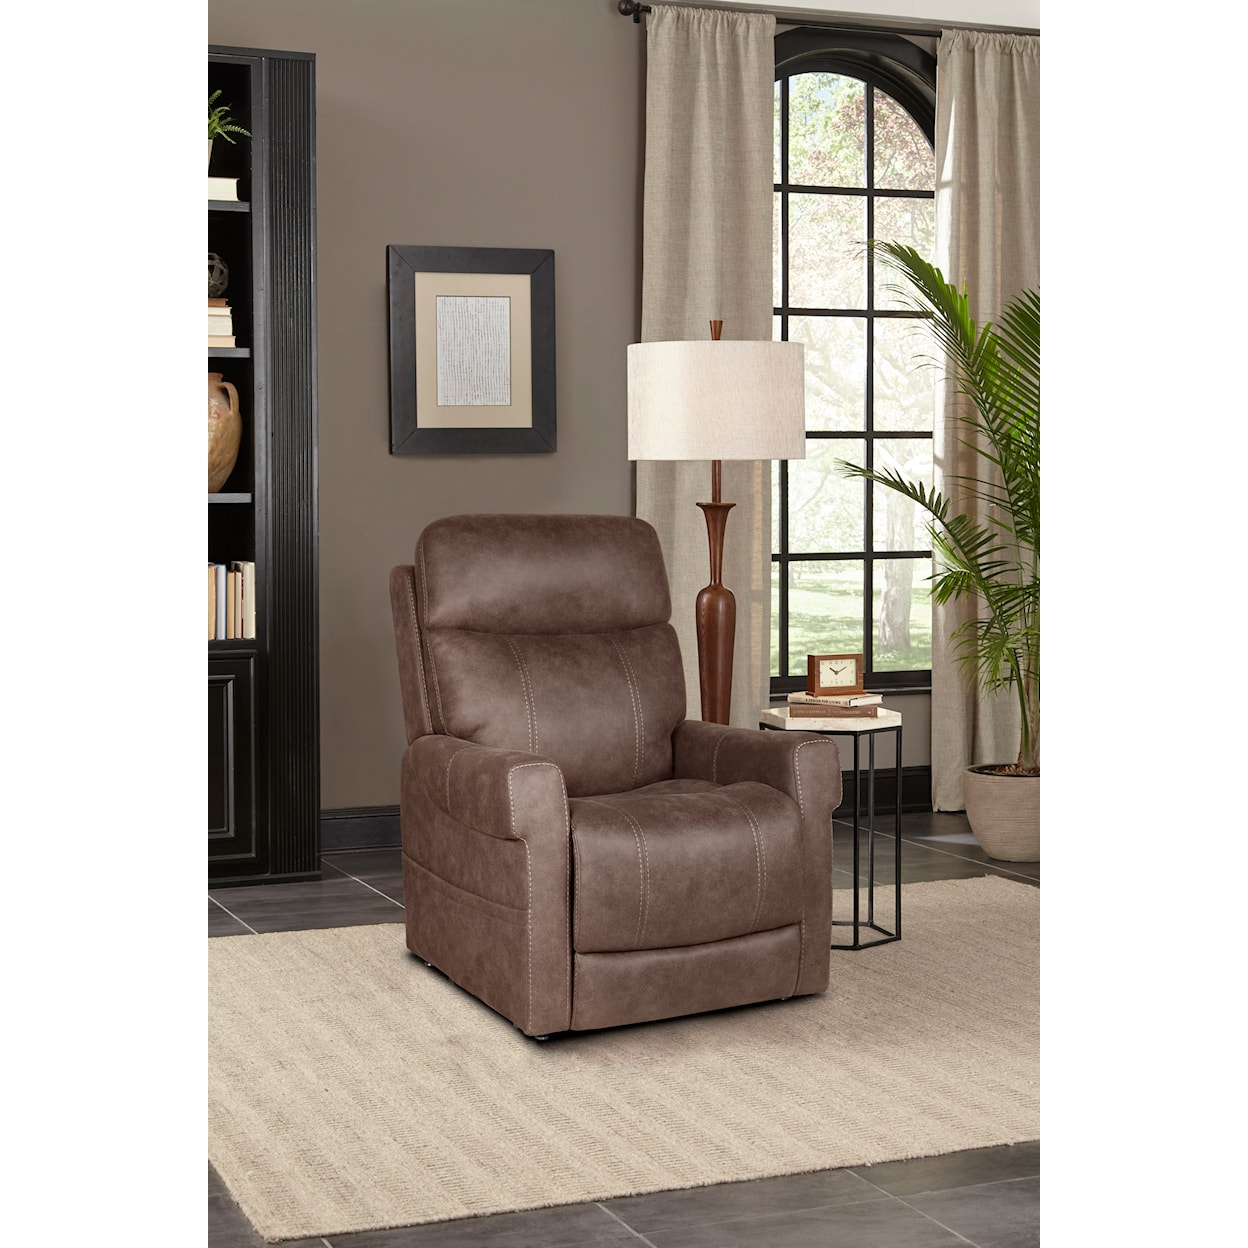 Moto Motion Canyon Power Lift Recliner with Massage